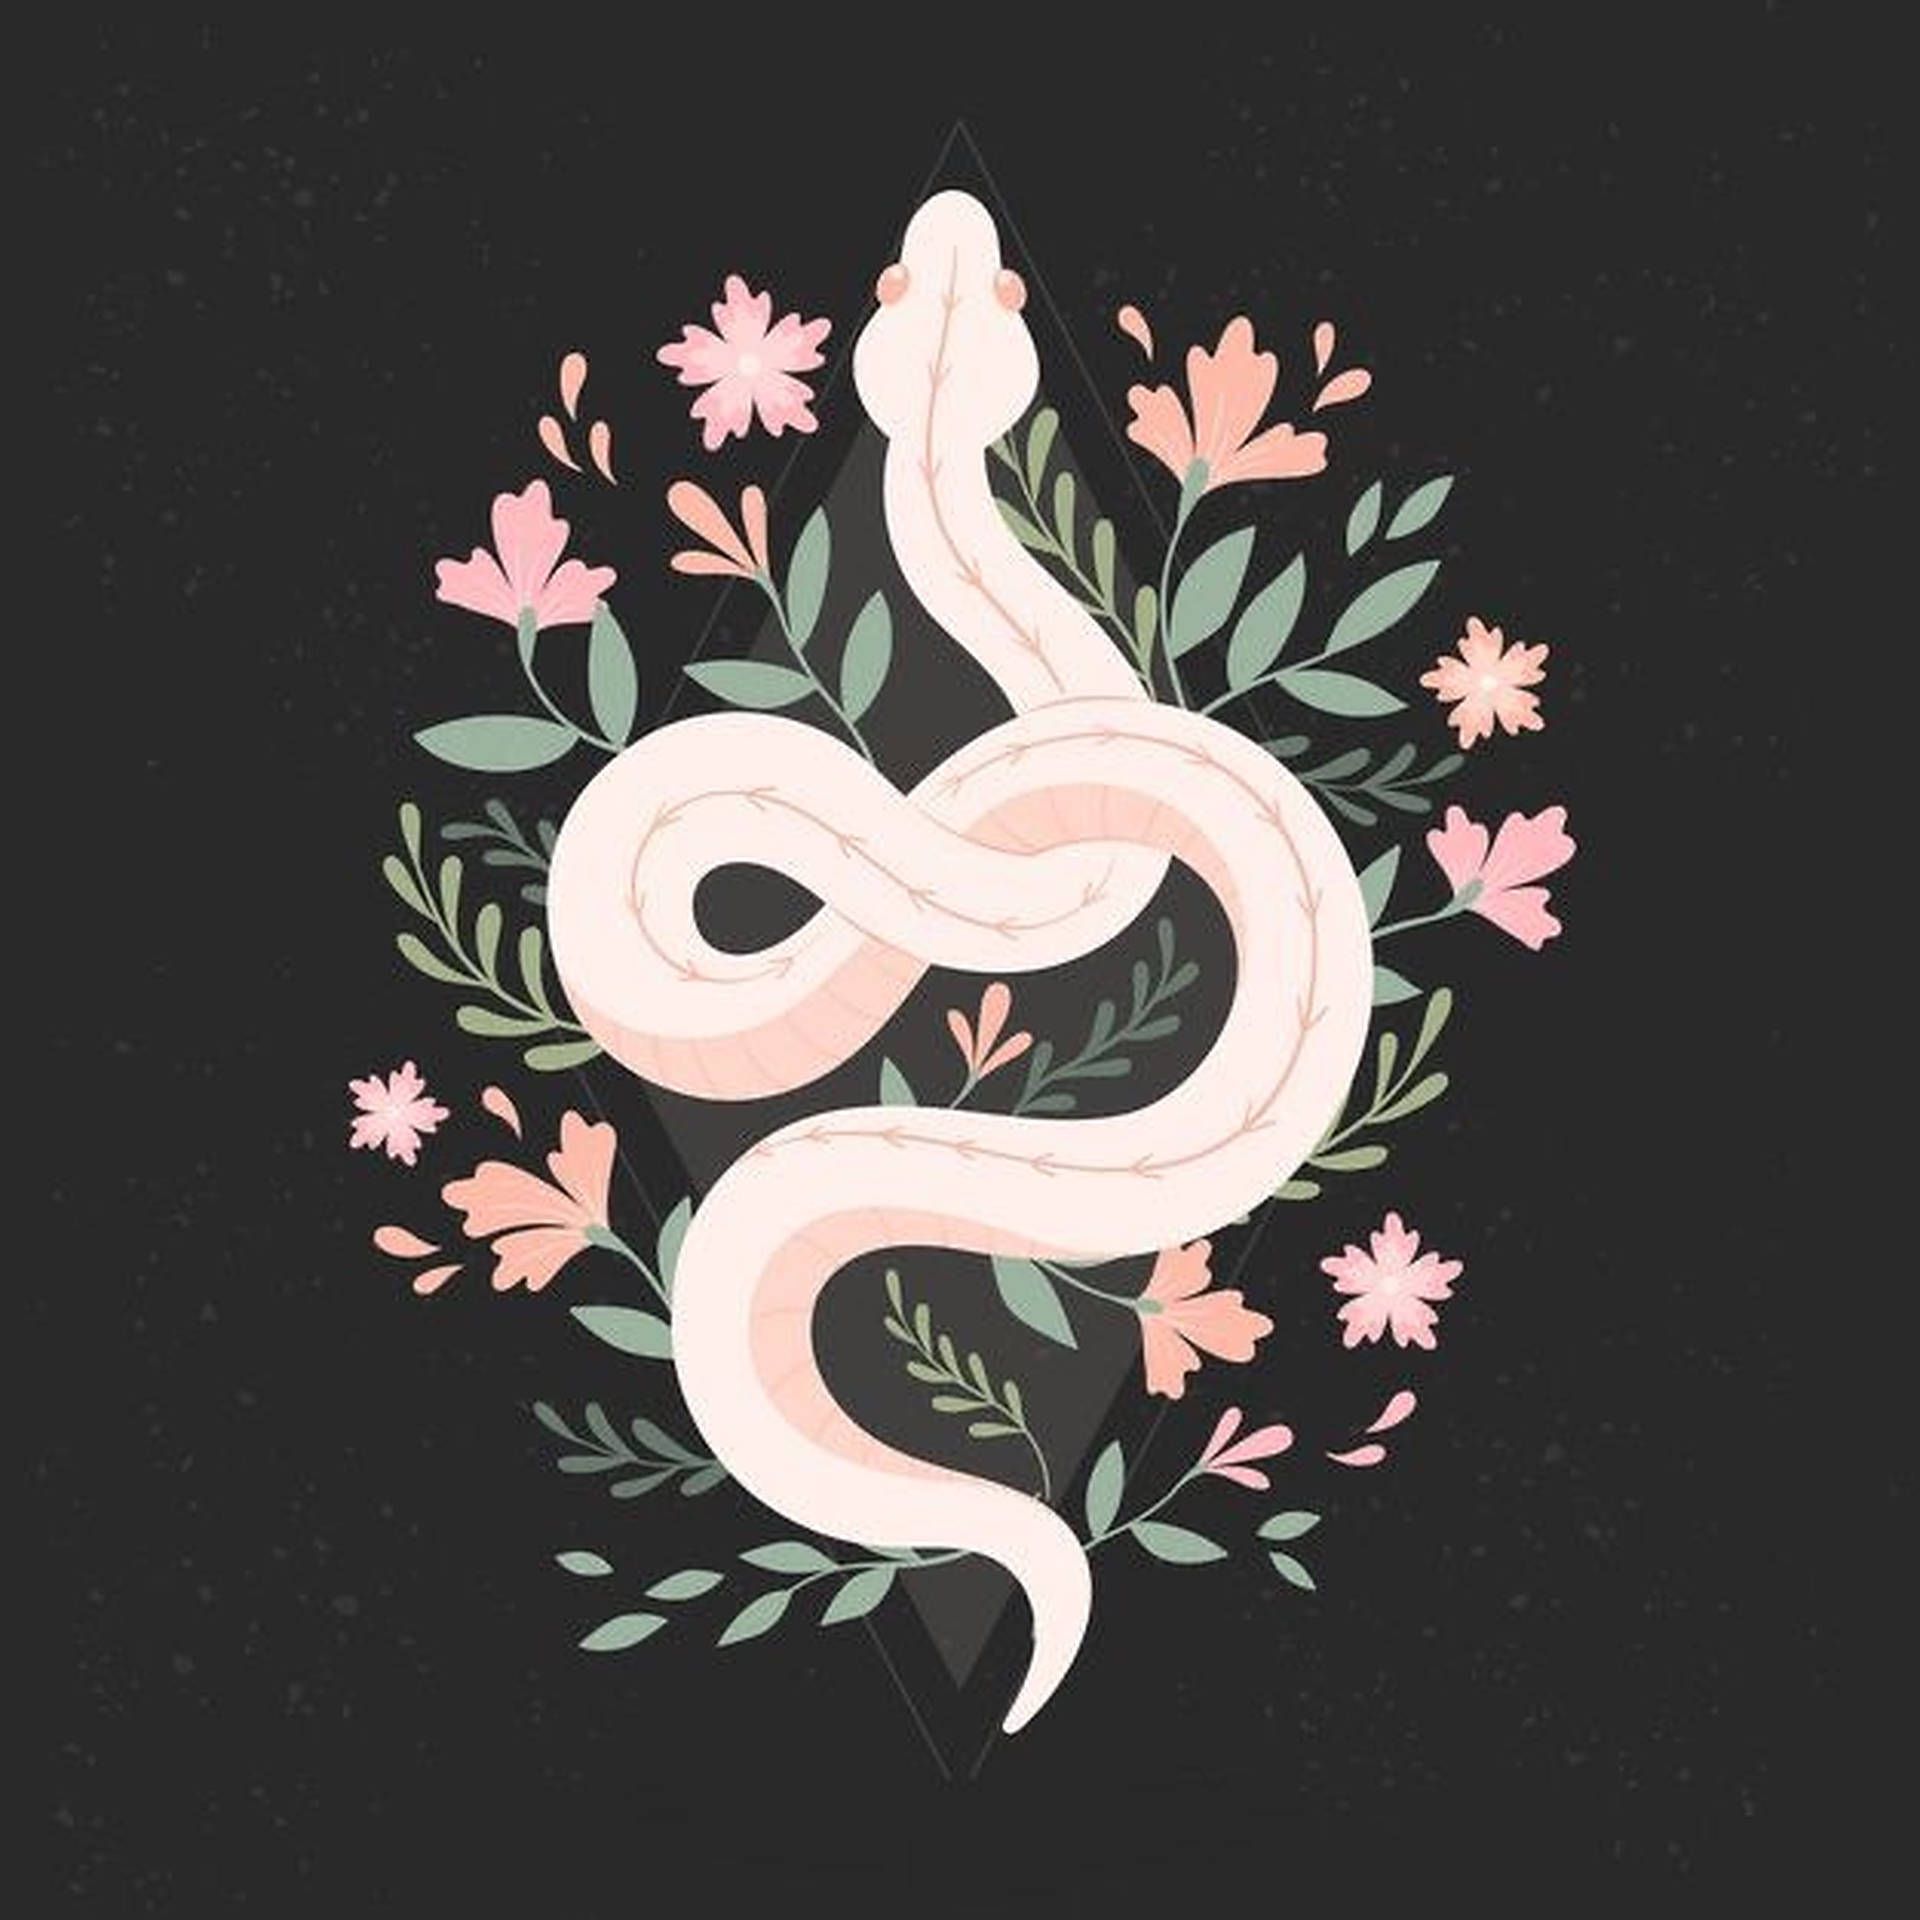 A snake with flowers and leaves on it - Snake